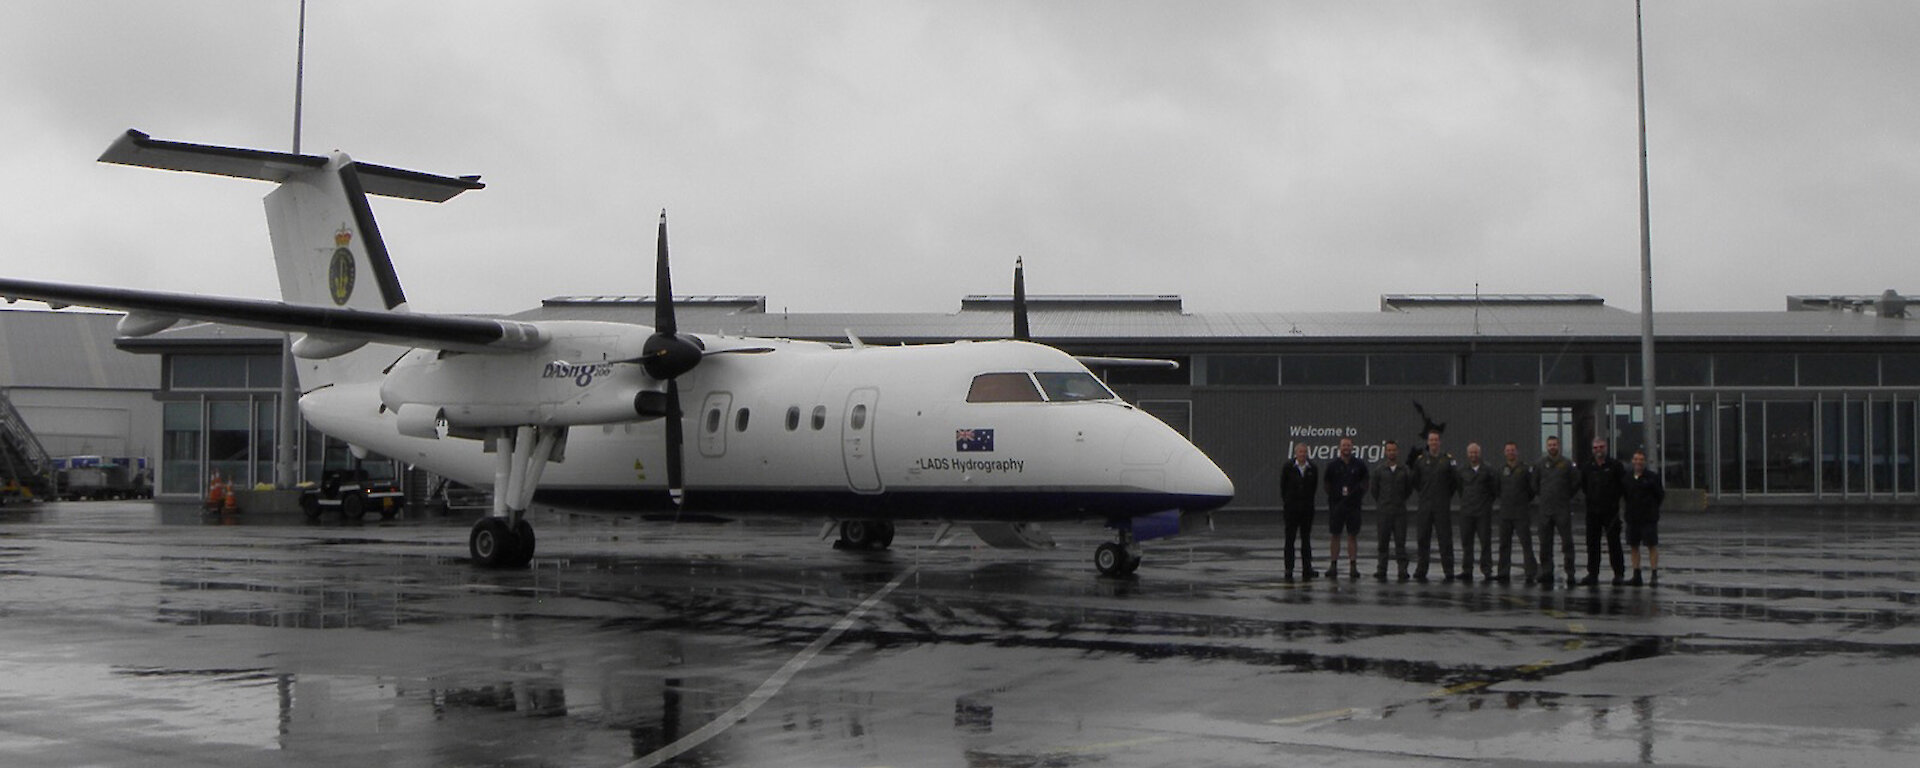 The Dash 8 on the runway at Invercargill with the nine person survey team standing beside.